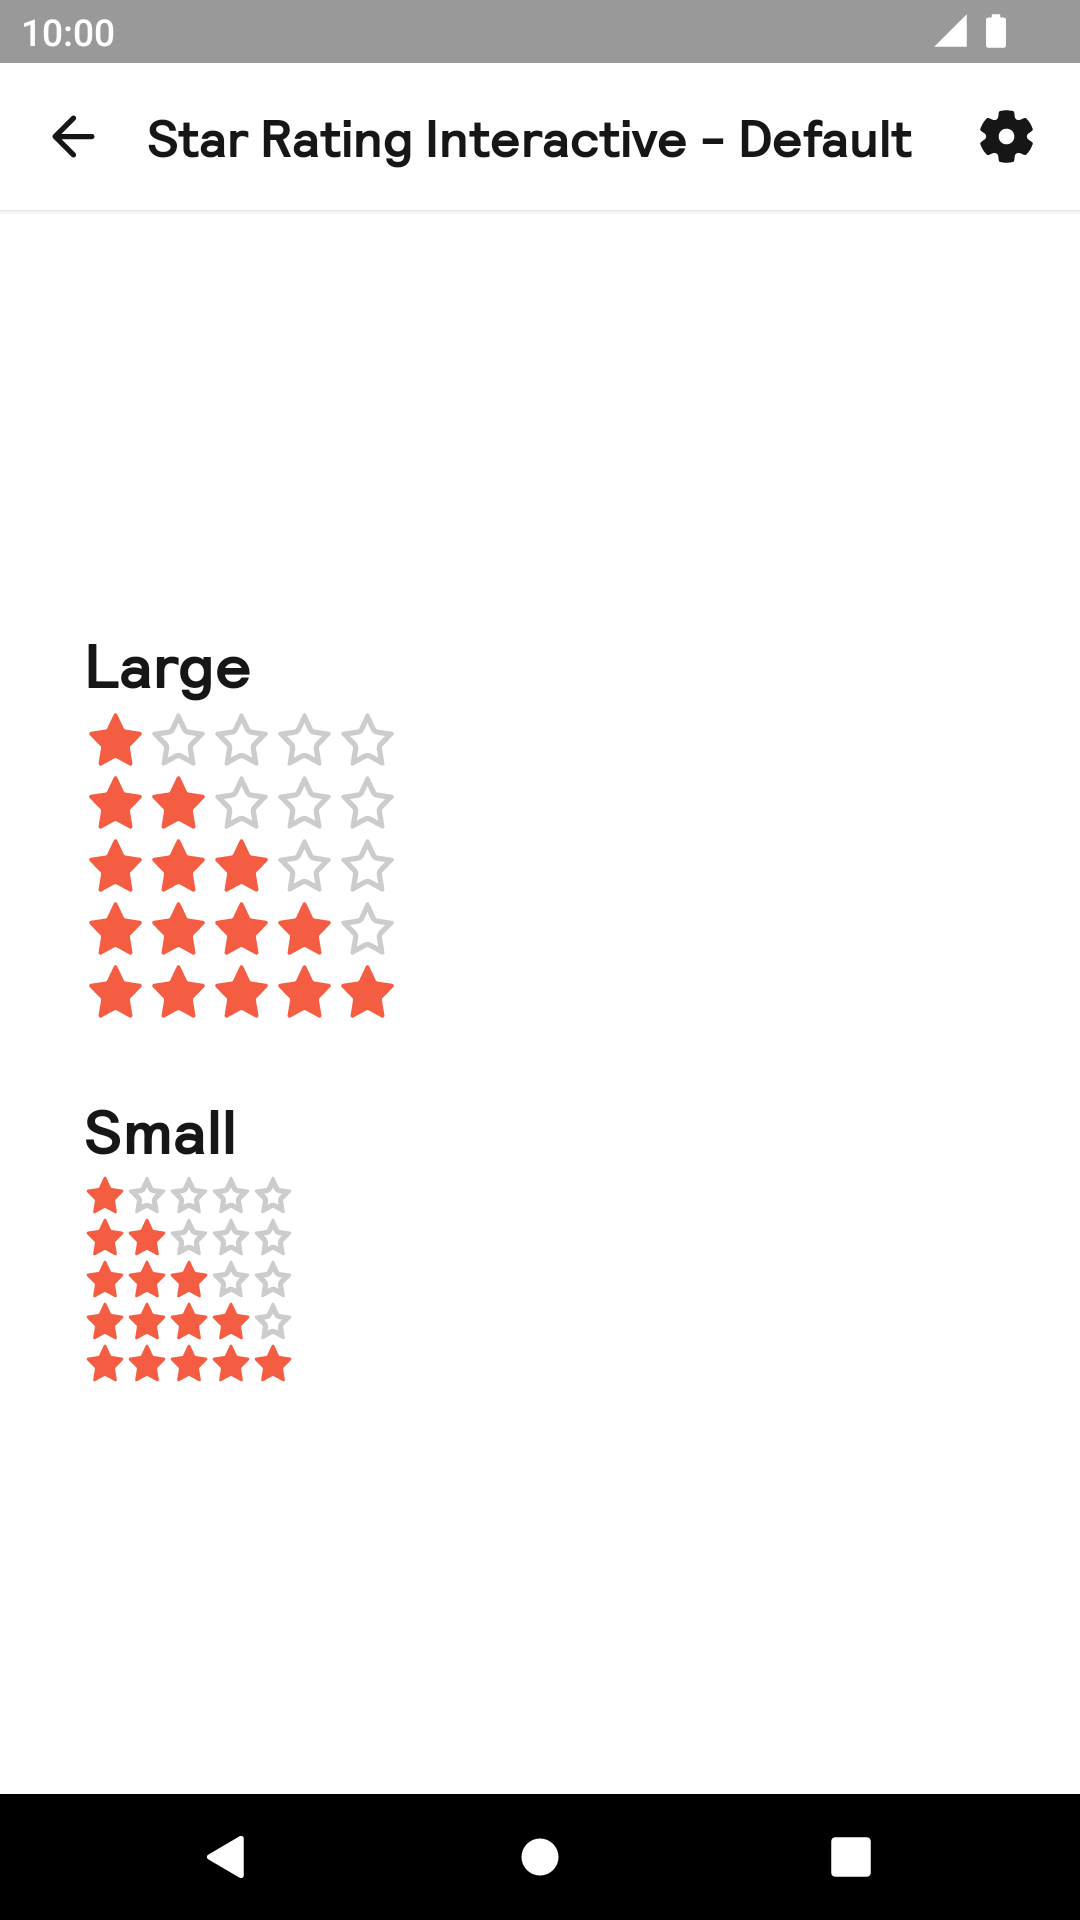 Interactive Star Rating component